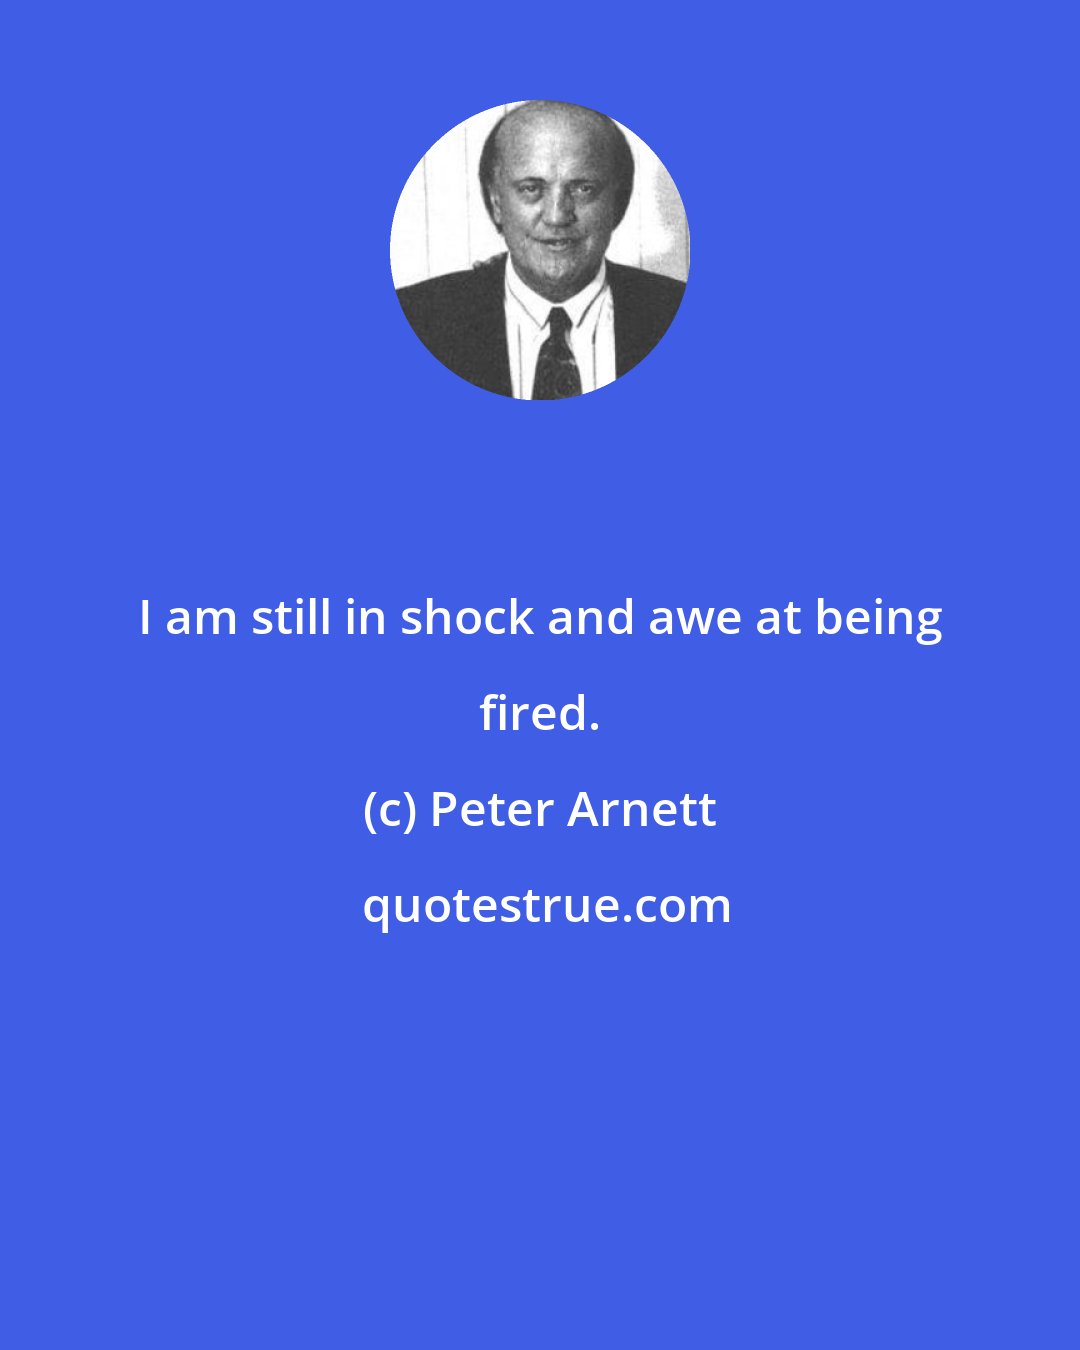 Peter Arnett: I am still in shock and awe at being fired.